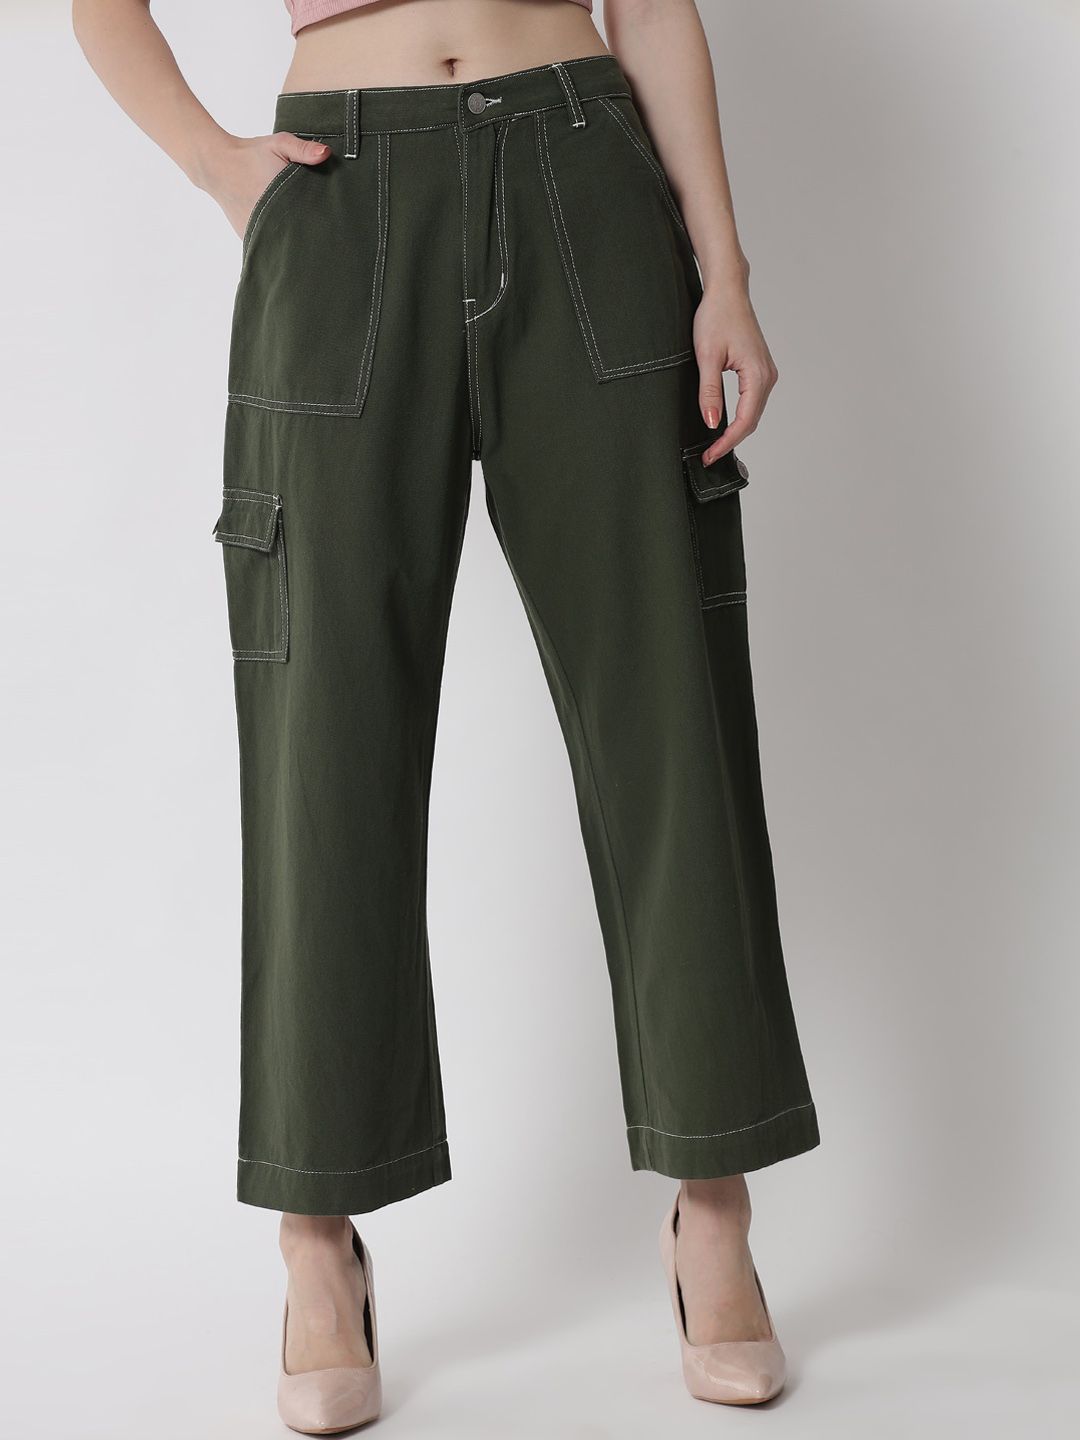 River Of Design Jeans Women Olive Green Wide Leg High-Rise Jeans Price in India